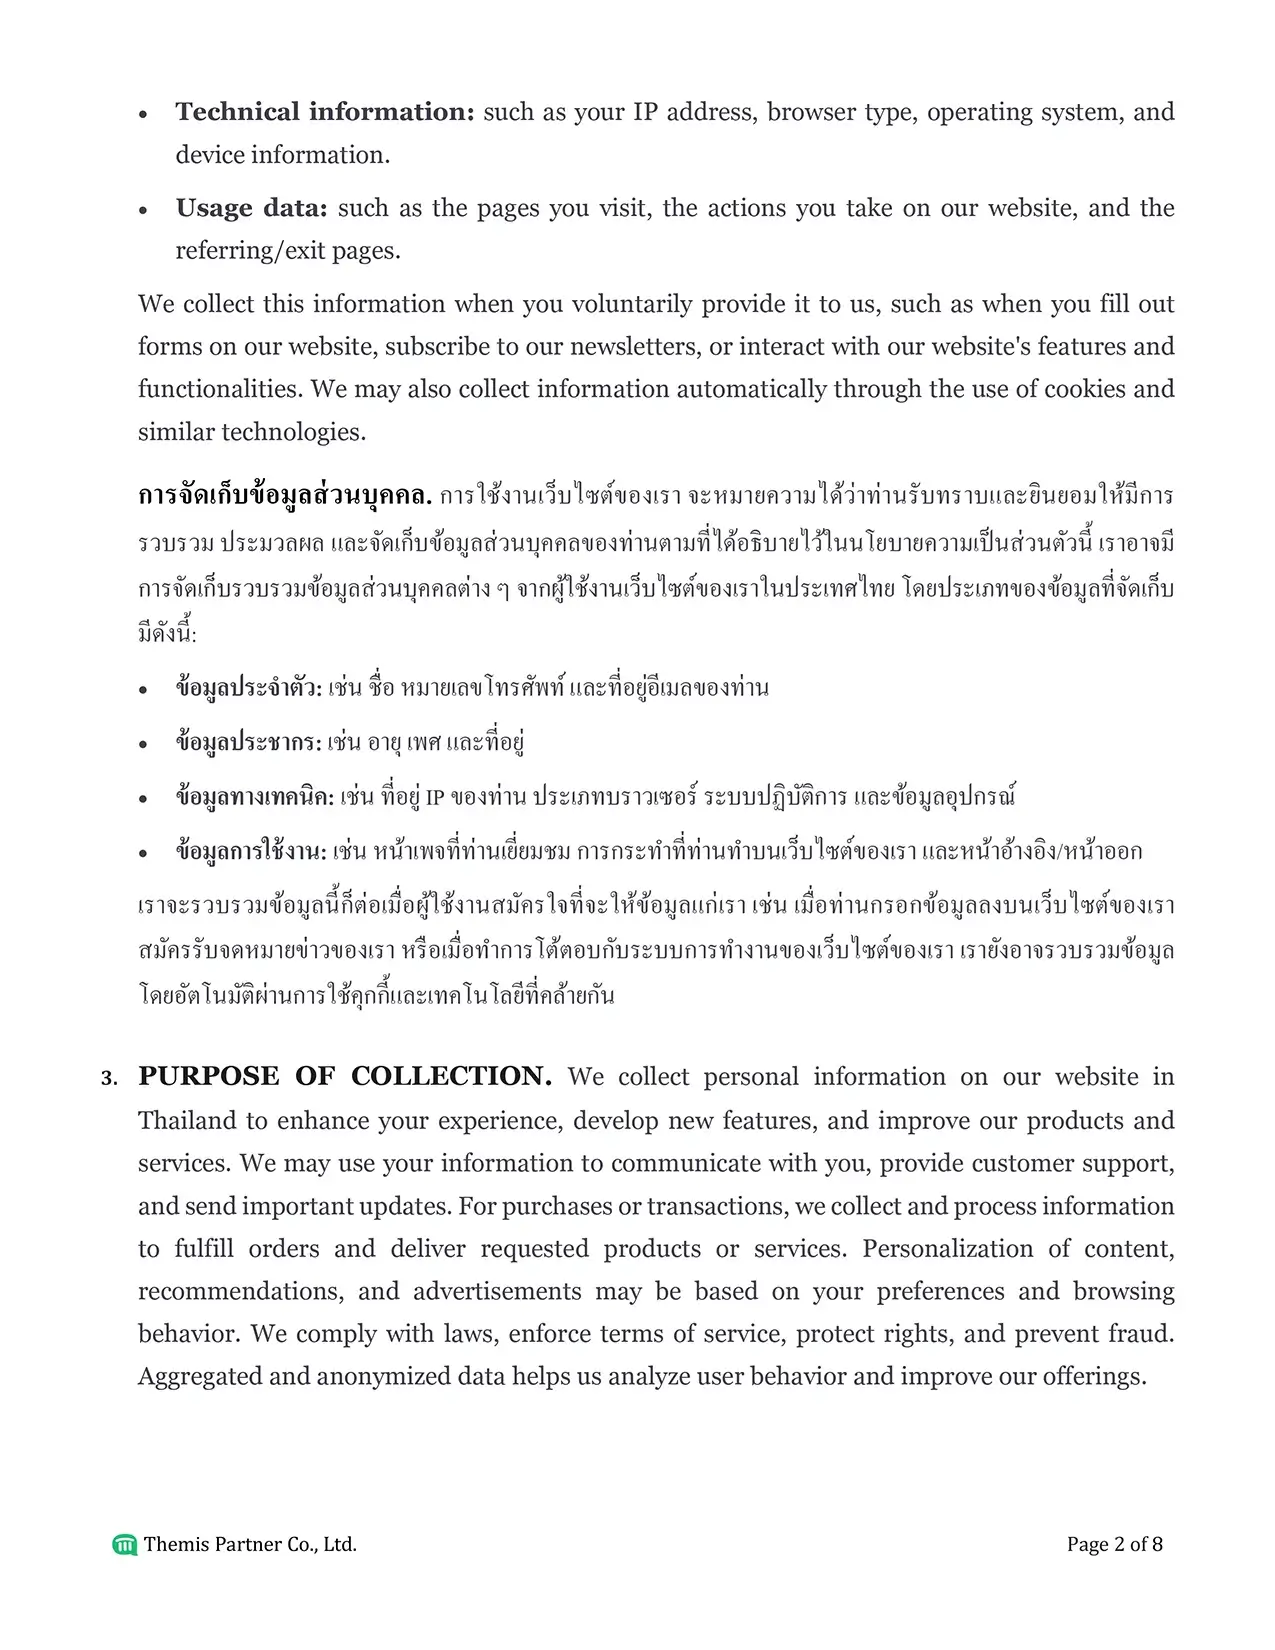 Privacy policy Thailand 2